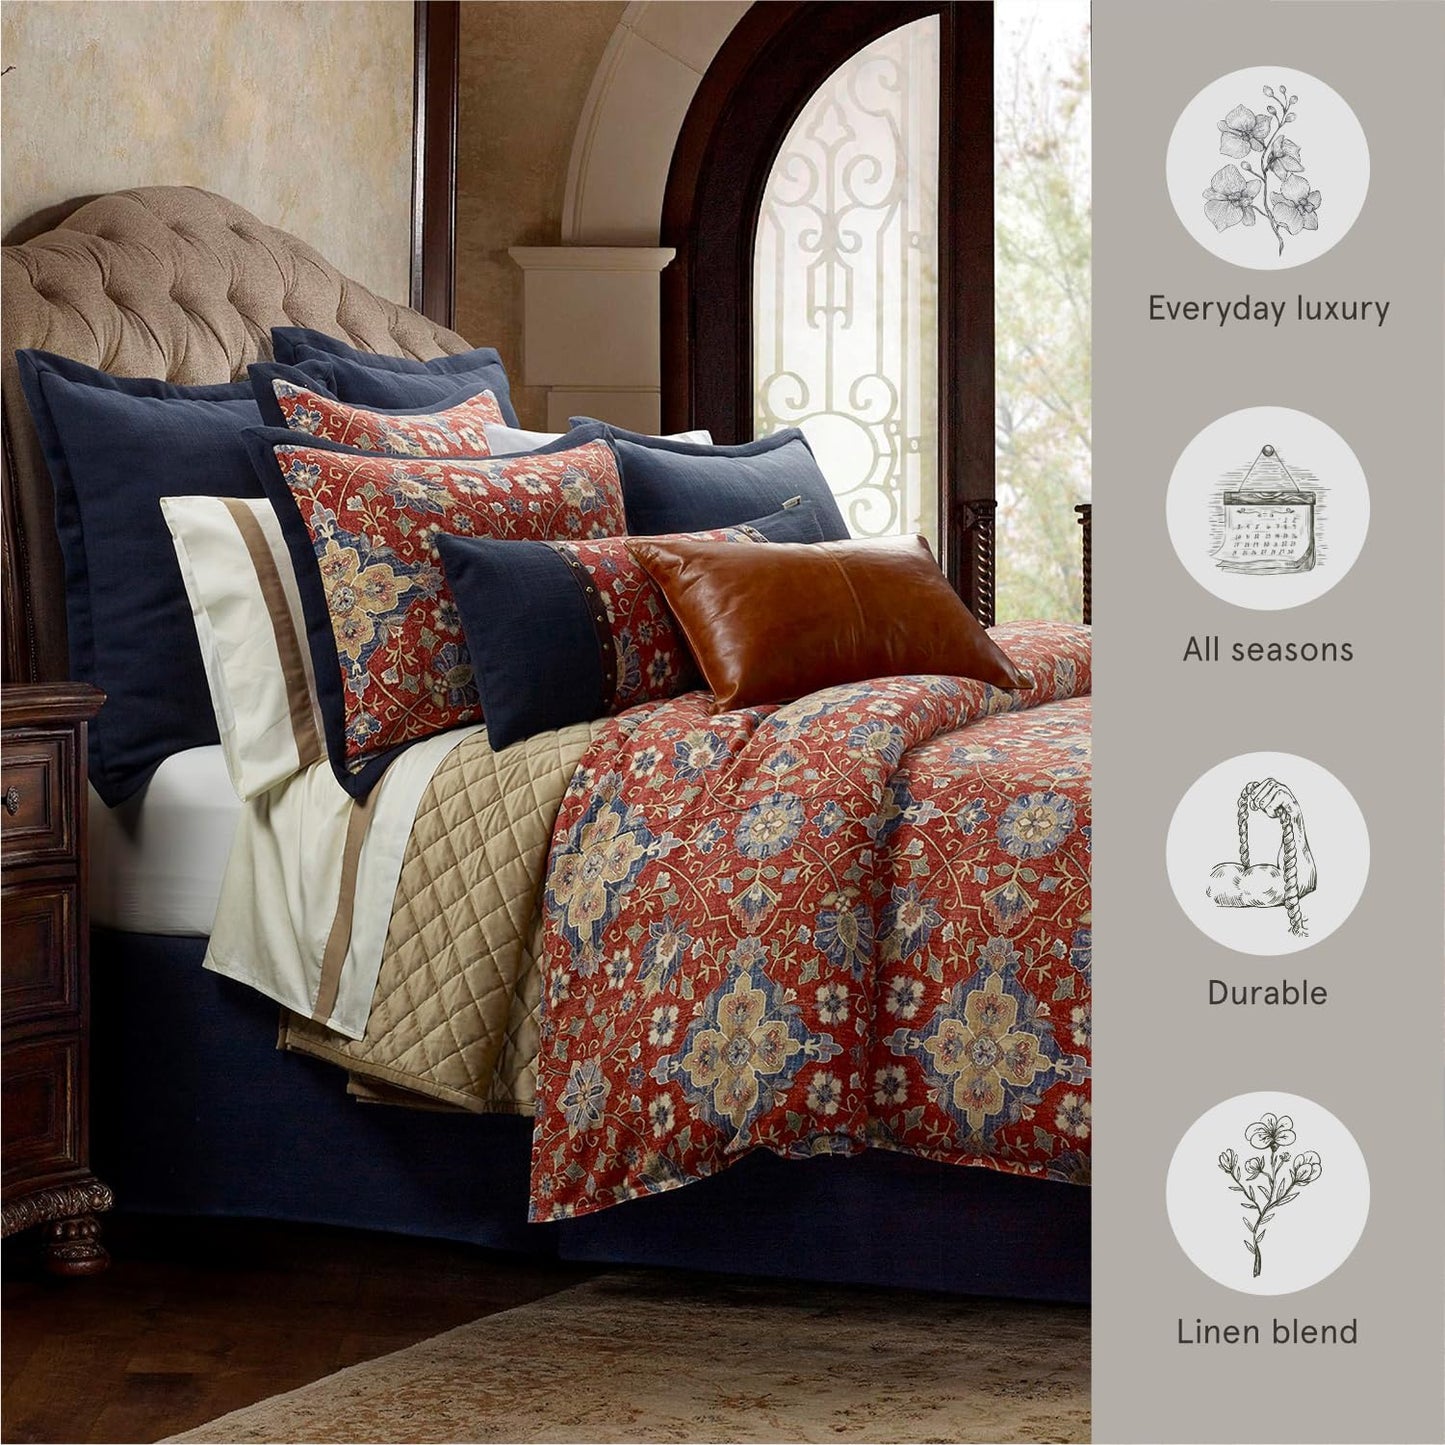 HiEnd Accents Washed Linen Melinda 3 Piece Comforter Set with Pillow Shams, Floral Medallion, Super Queen Size, Rustic Traditional Western Style Luxury Bedding Set, 1 Comforter and 2 Pillowcases